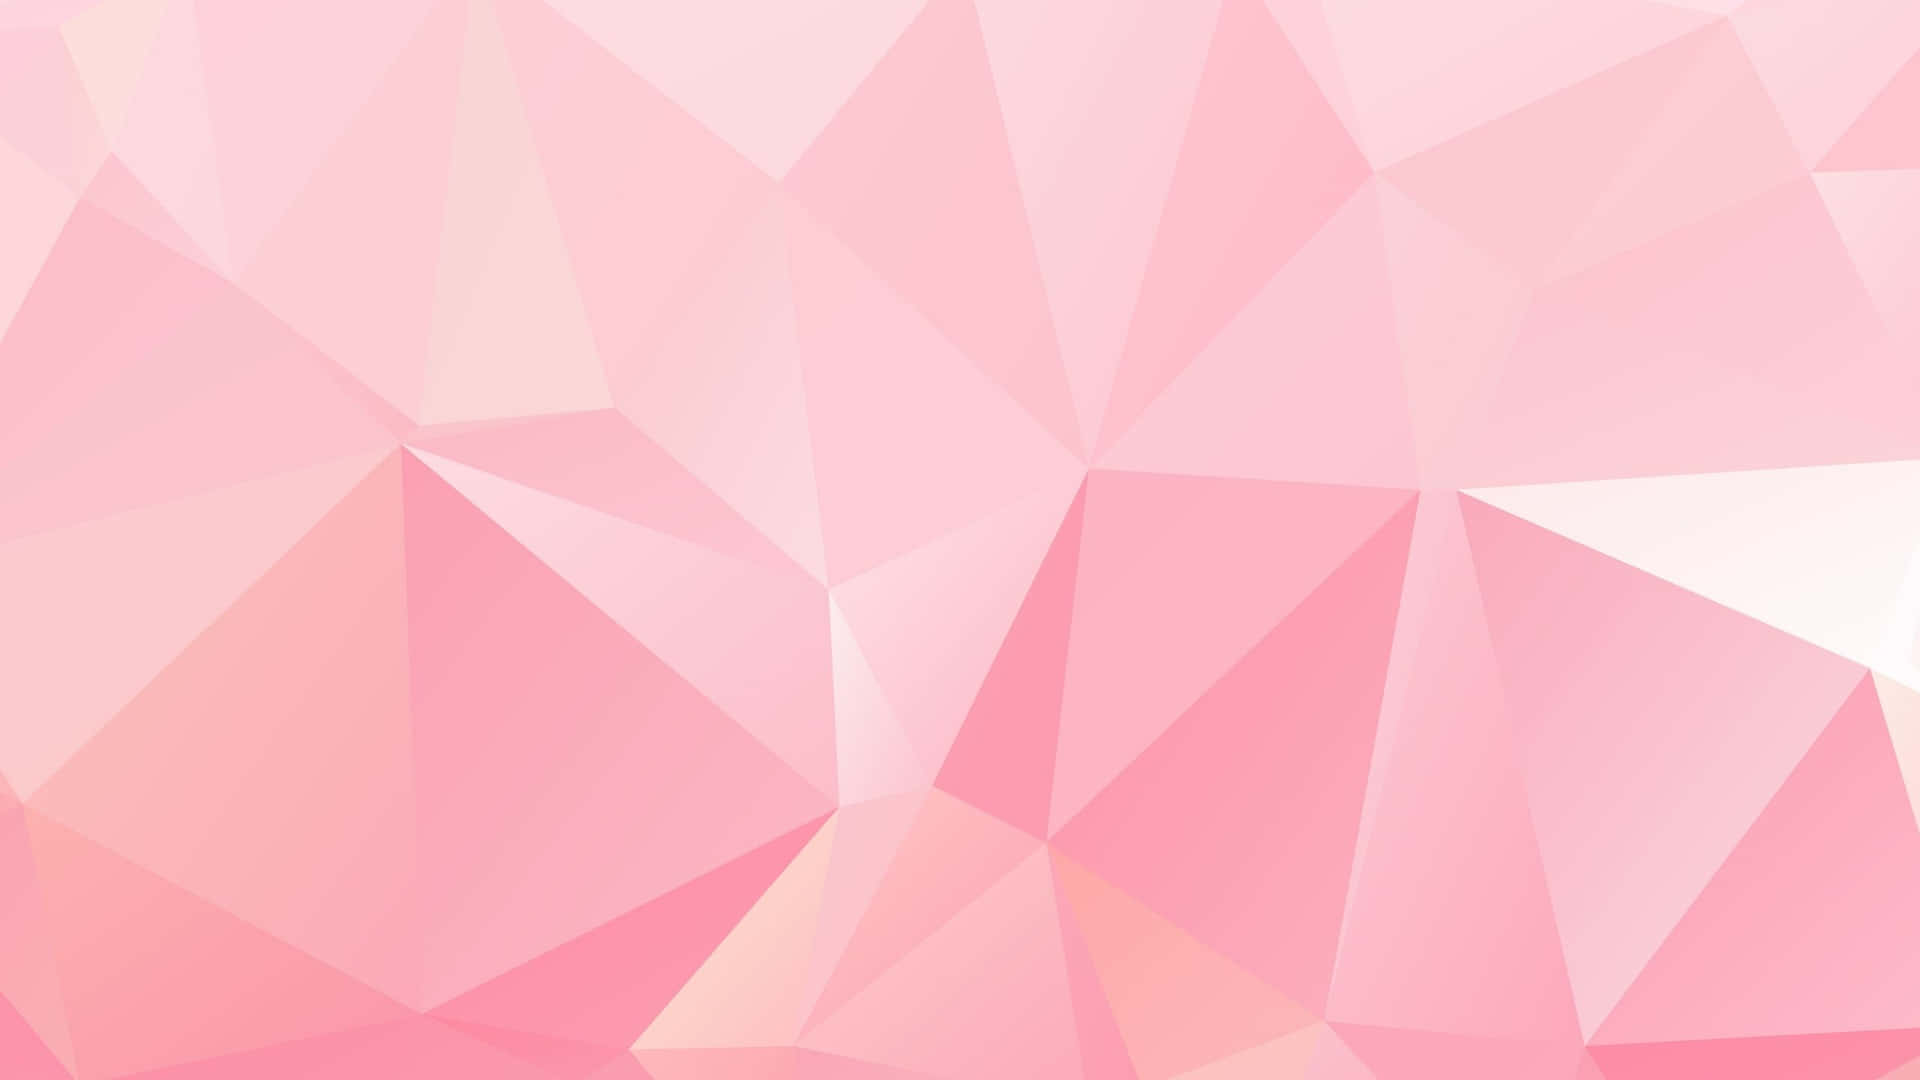 Aesthetic Computer Light Pink Abstract Geometric Patterns Wallpaper